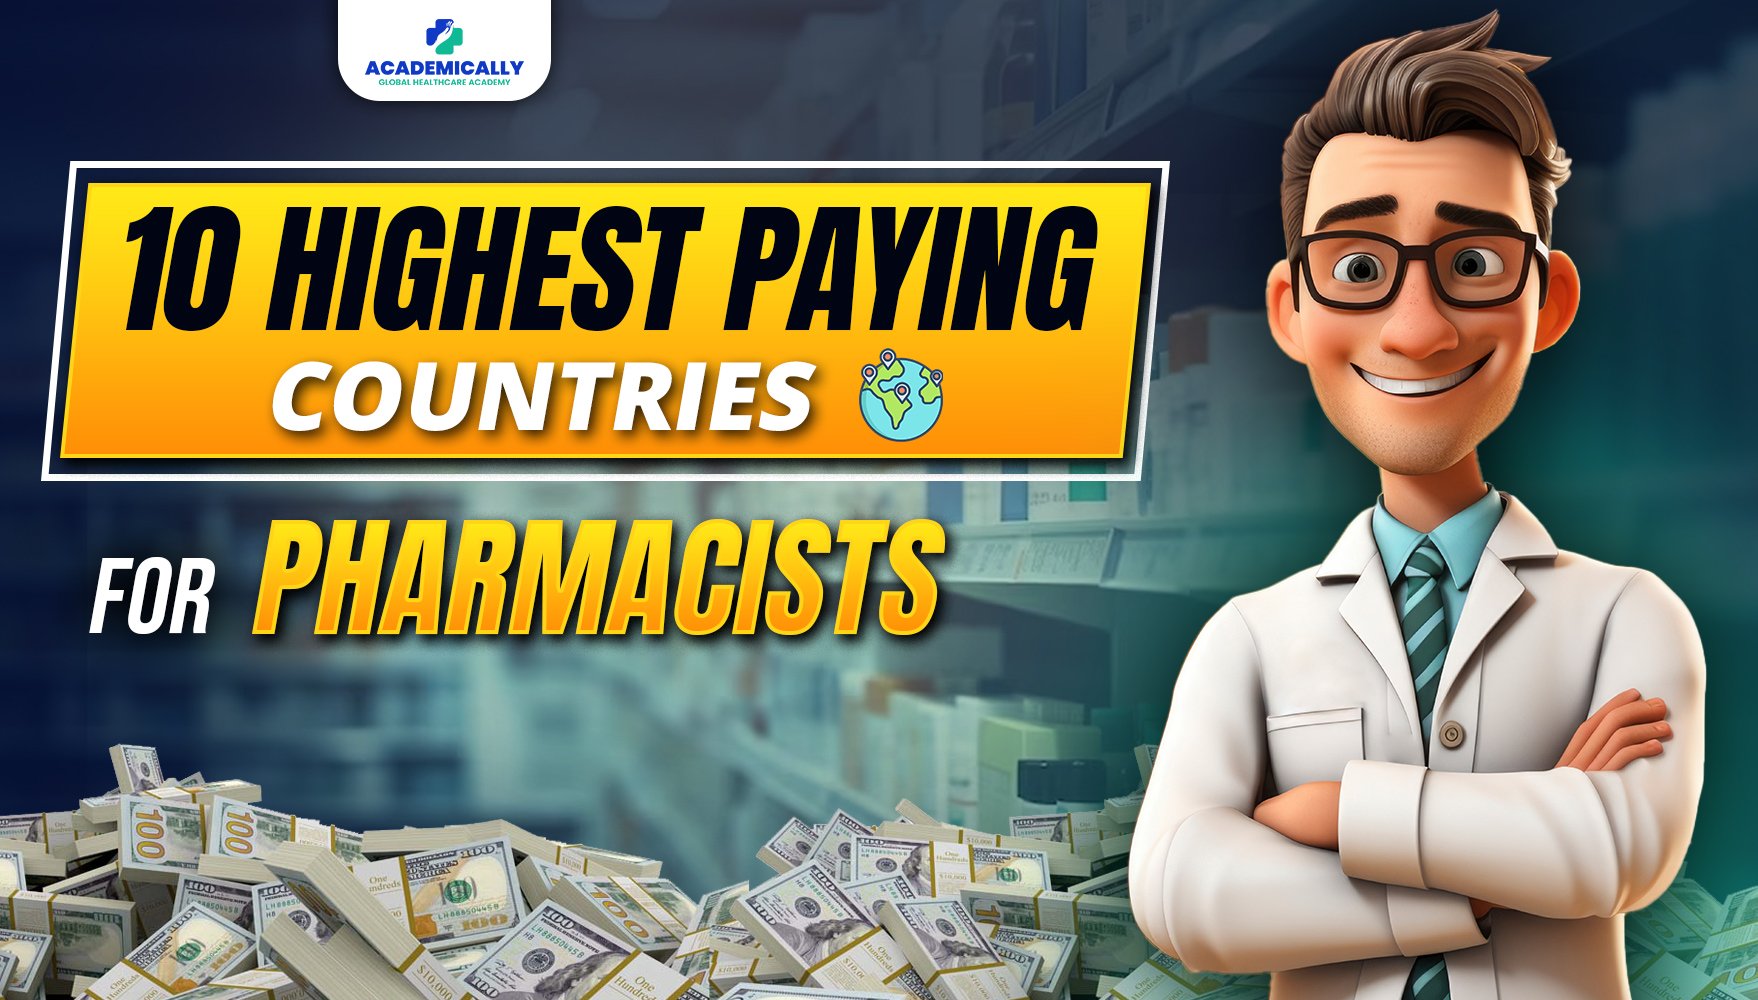 10 Highest-paying Countries for Pharmacists